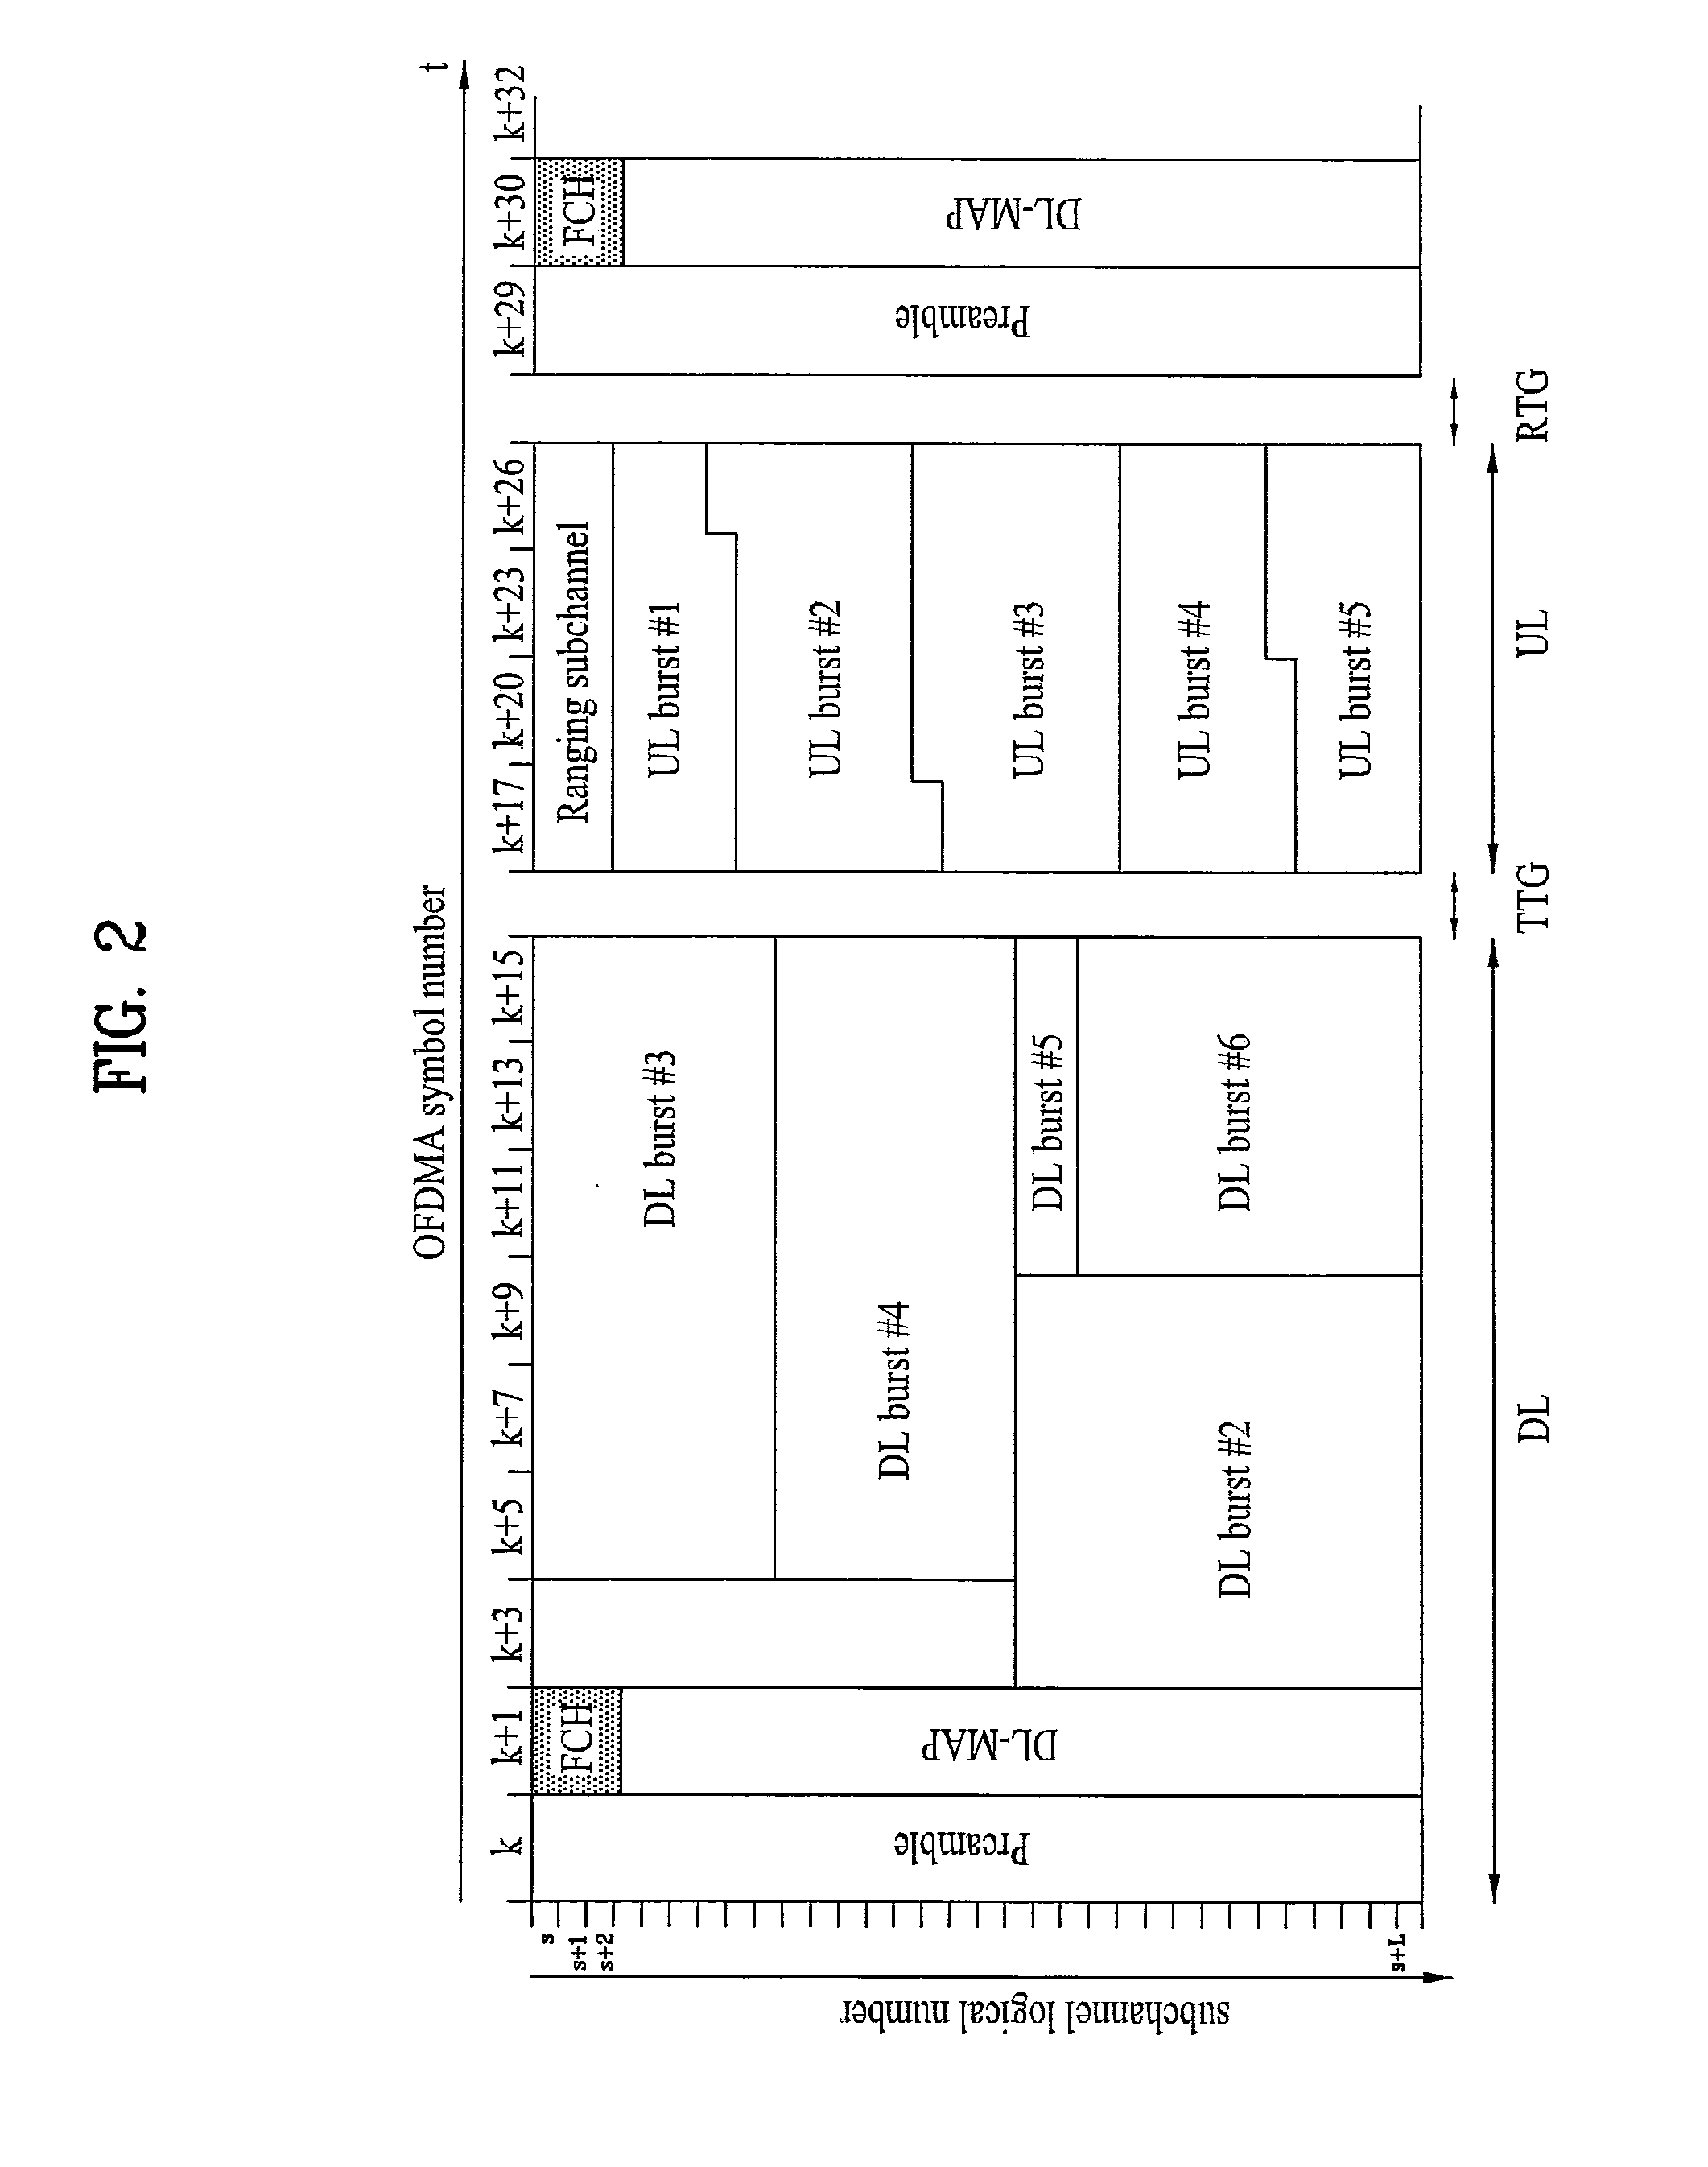 Ranging structure, multiplexing method and signaling method for legacy support mode